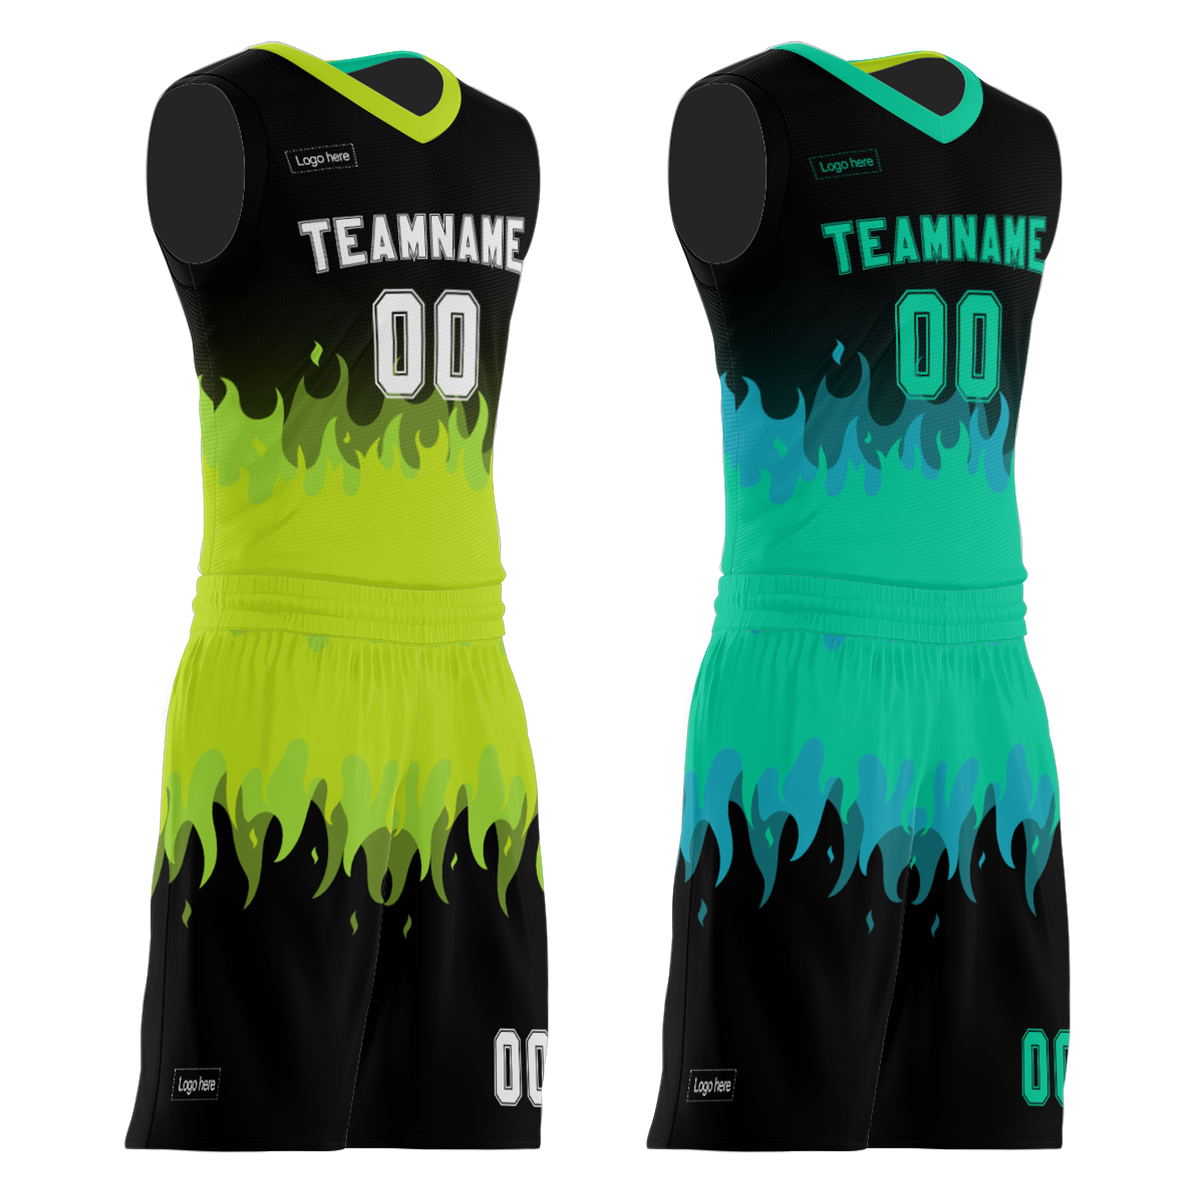 Wholesale Custom Basketball Jerseys Sublimation Printed Reversible Mesh Performance Athletic Team Uniforms for Sports